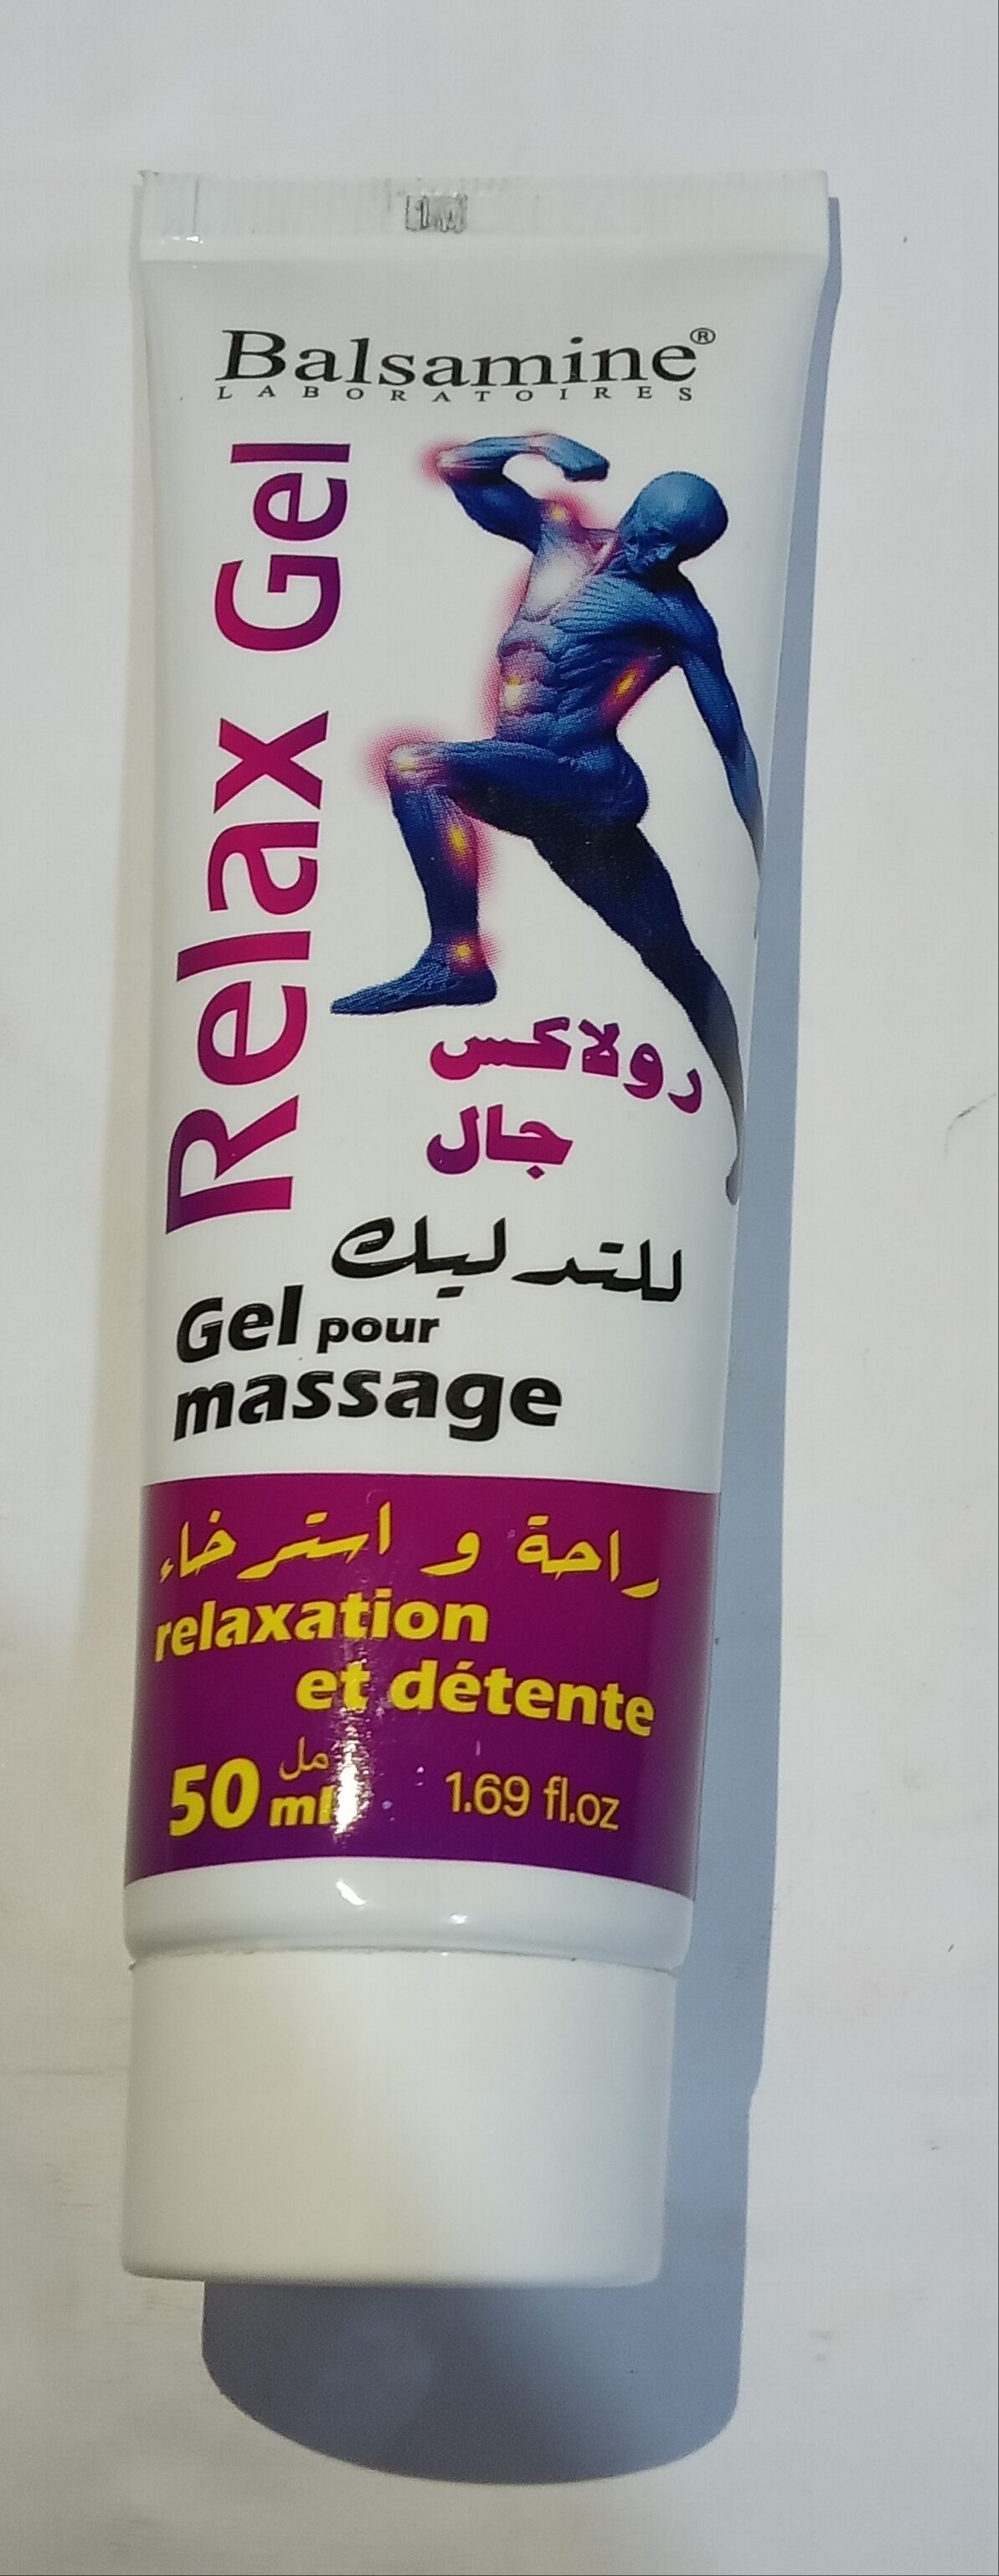 Gel relax - Tuote - fr